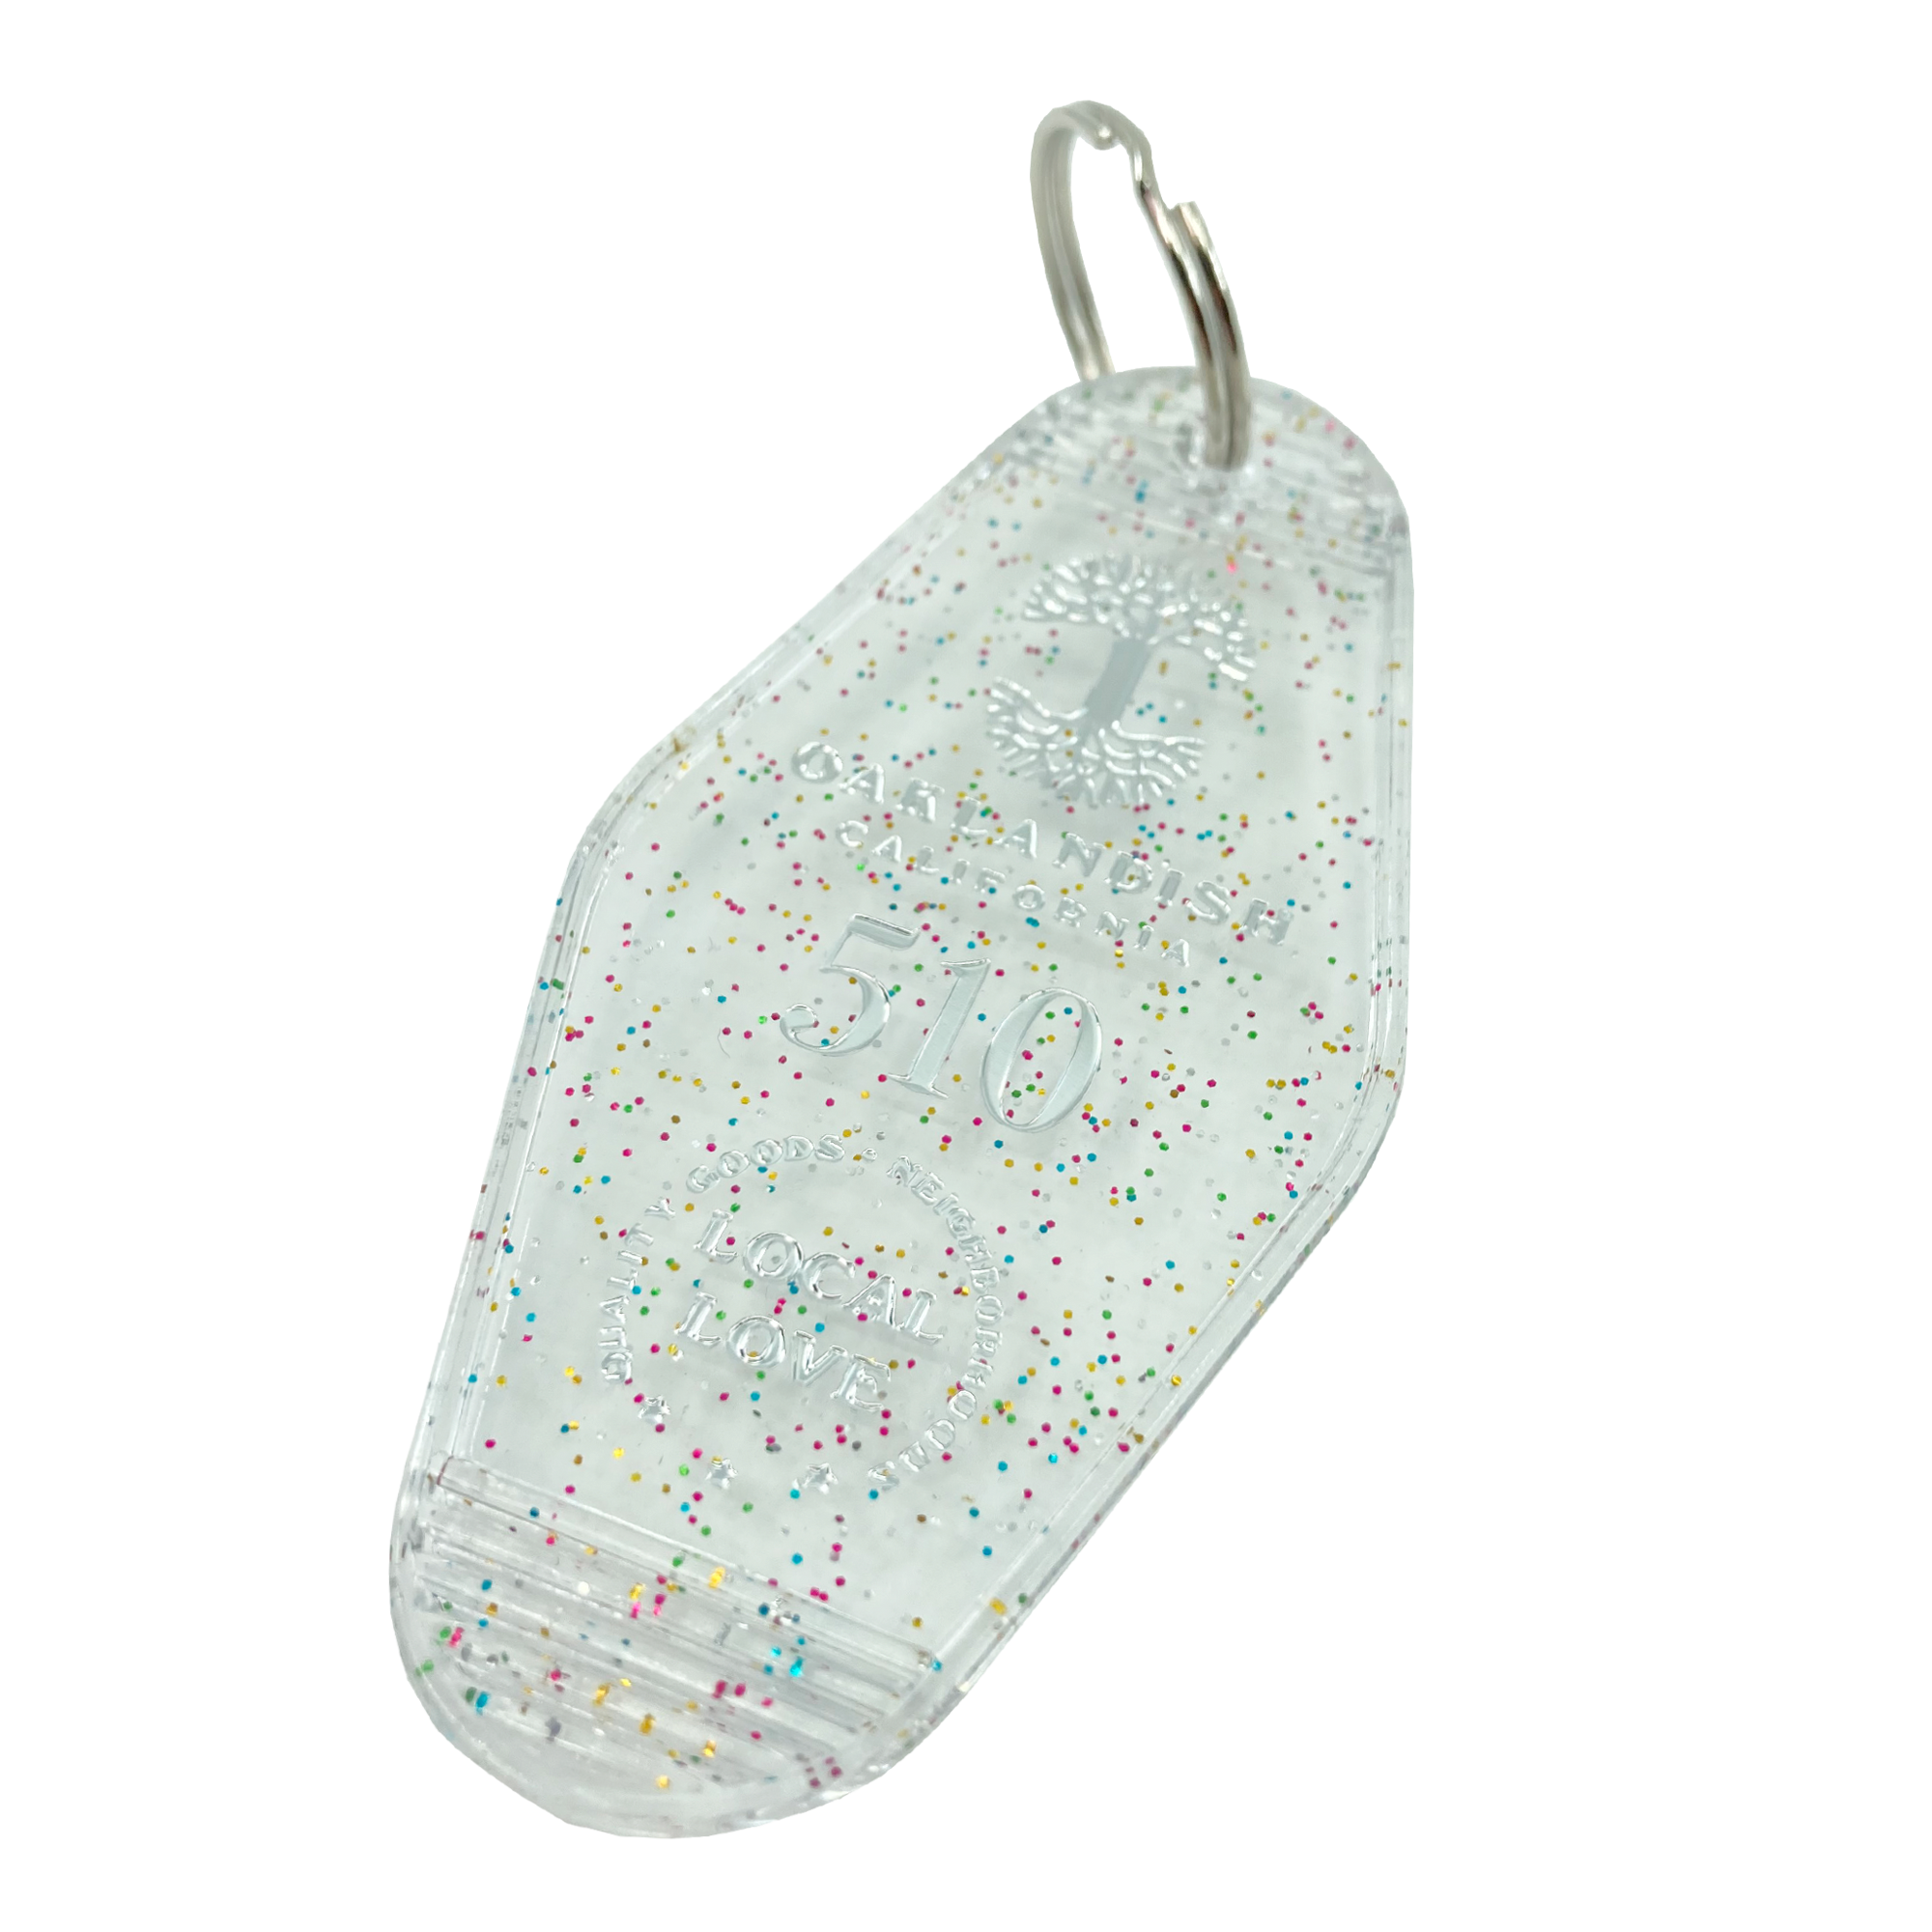 Detailed angle shot of translucent white with rainbow glitter motel-style keychain with Oaklandish Logo and 510 local love.